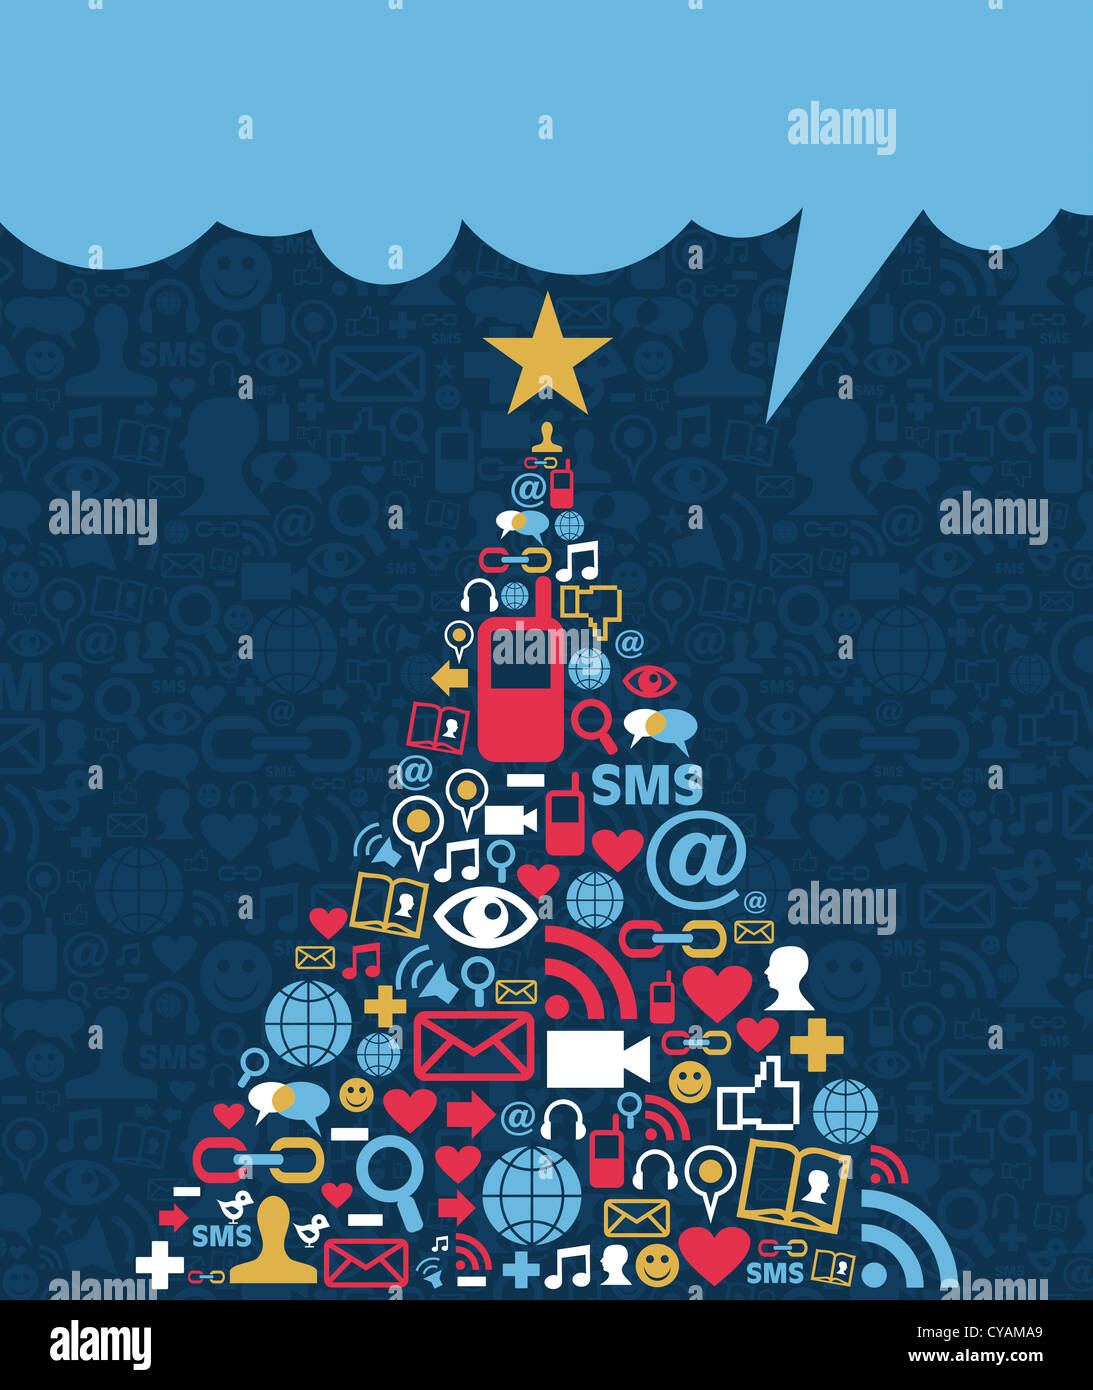 Social media networks icon set in Christmas pine tree greeting card background. Vector illustration layered for easy manipulation and custom coloring. Stock Photo